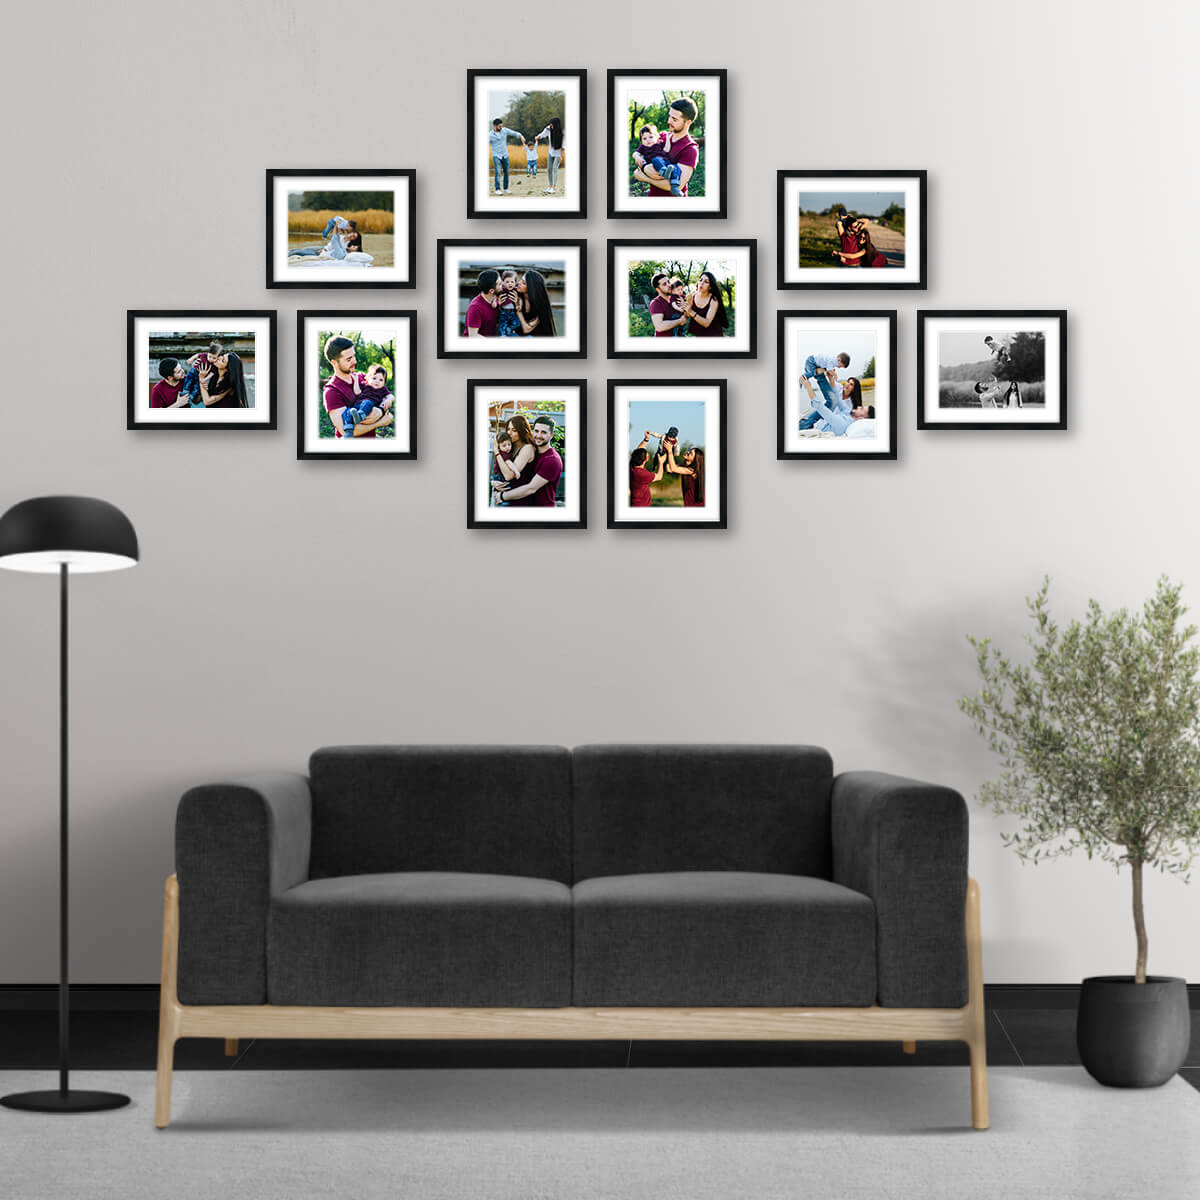 94" x 46" Gallery Wall Wooden Frame (Set of 12)